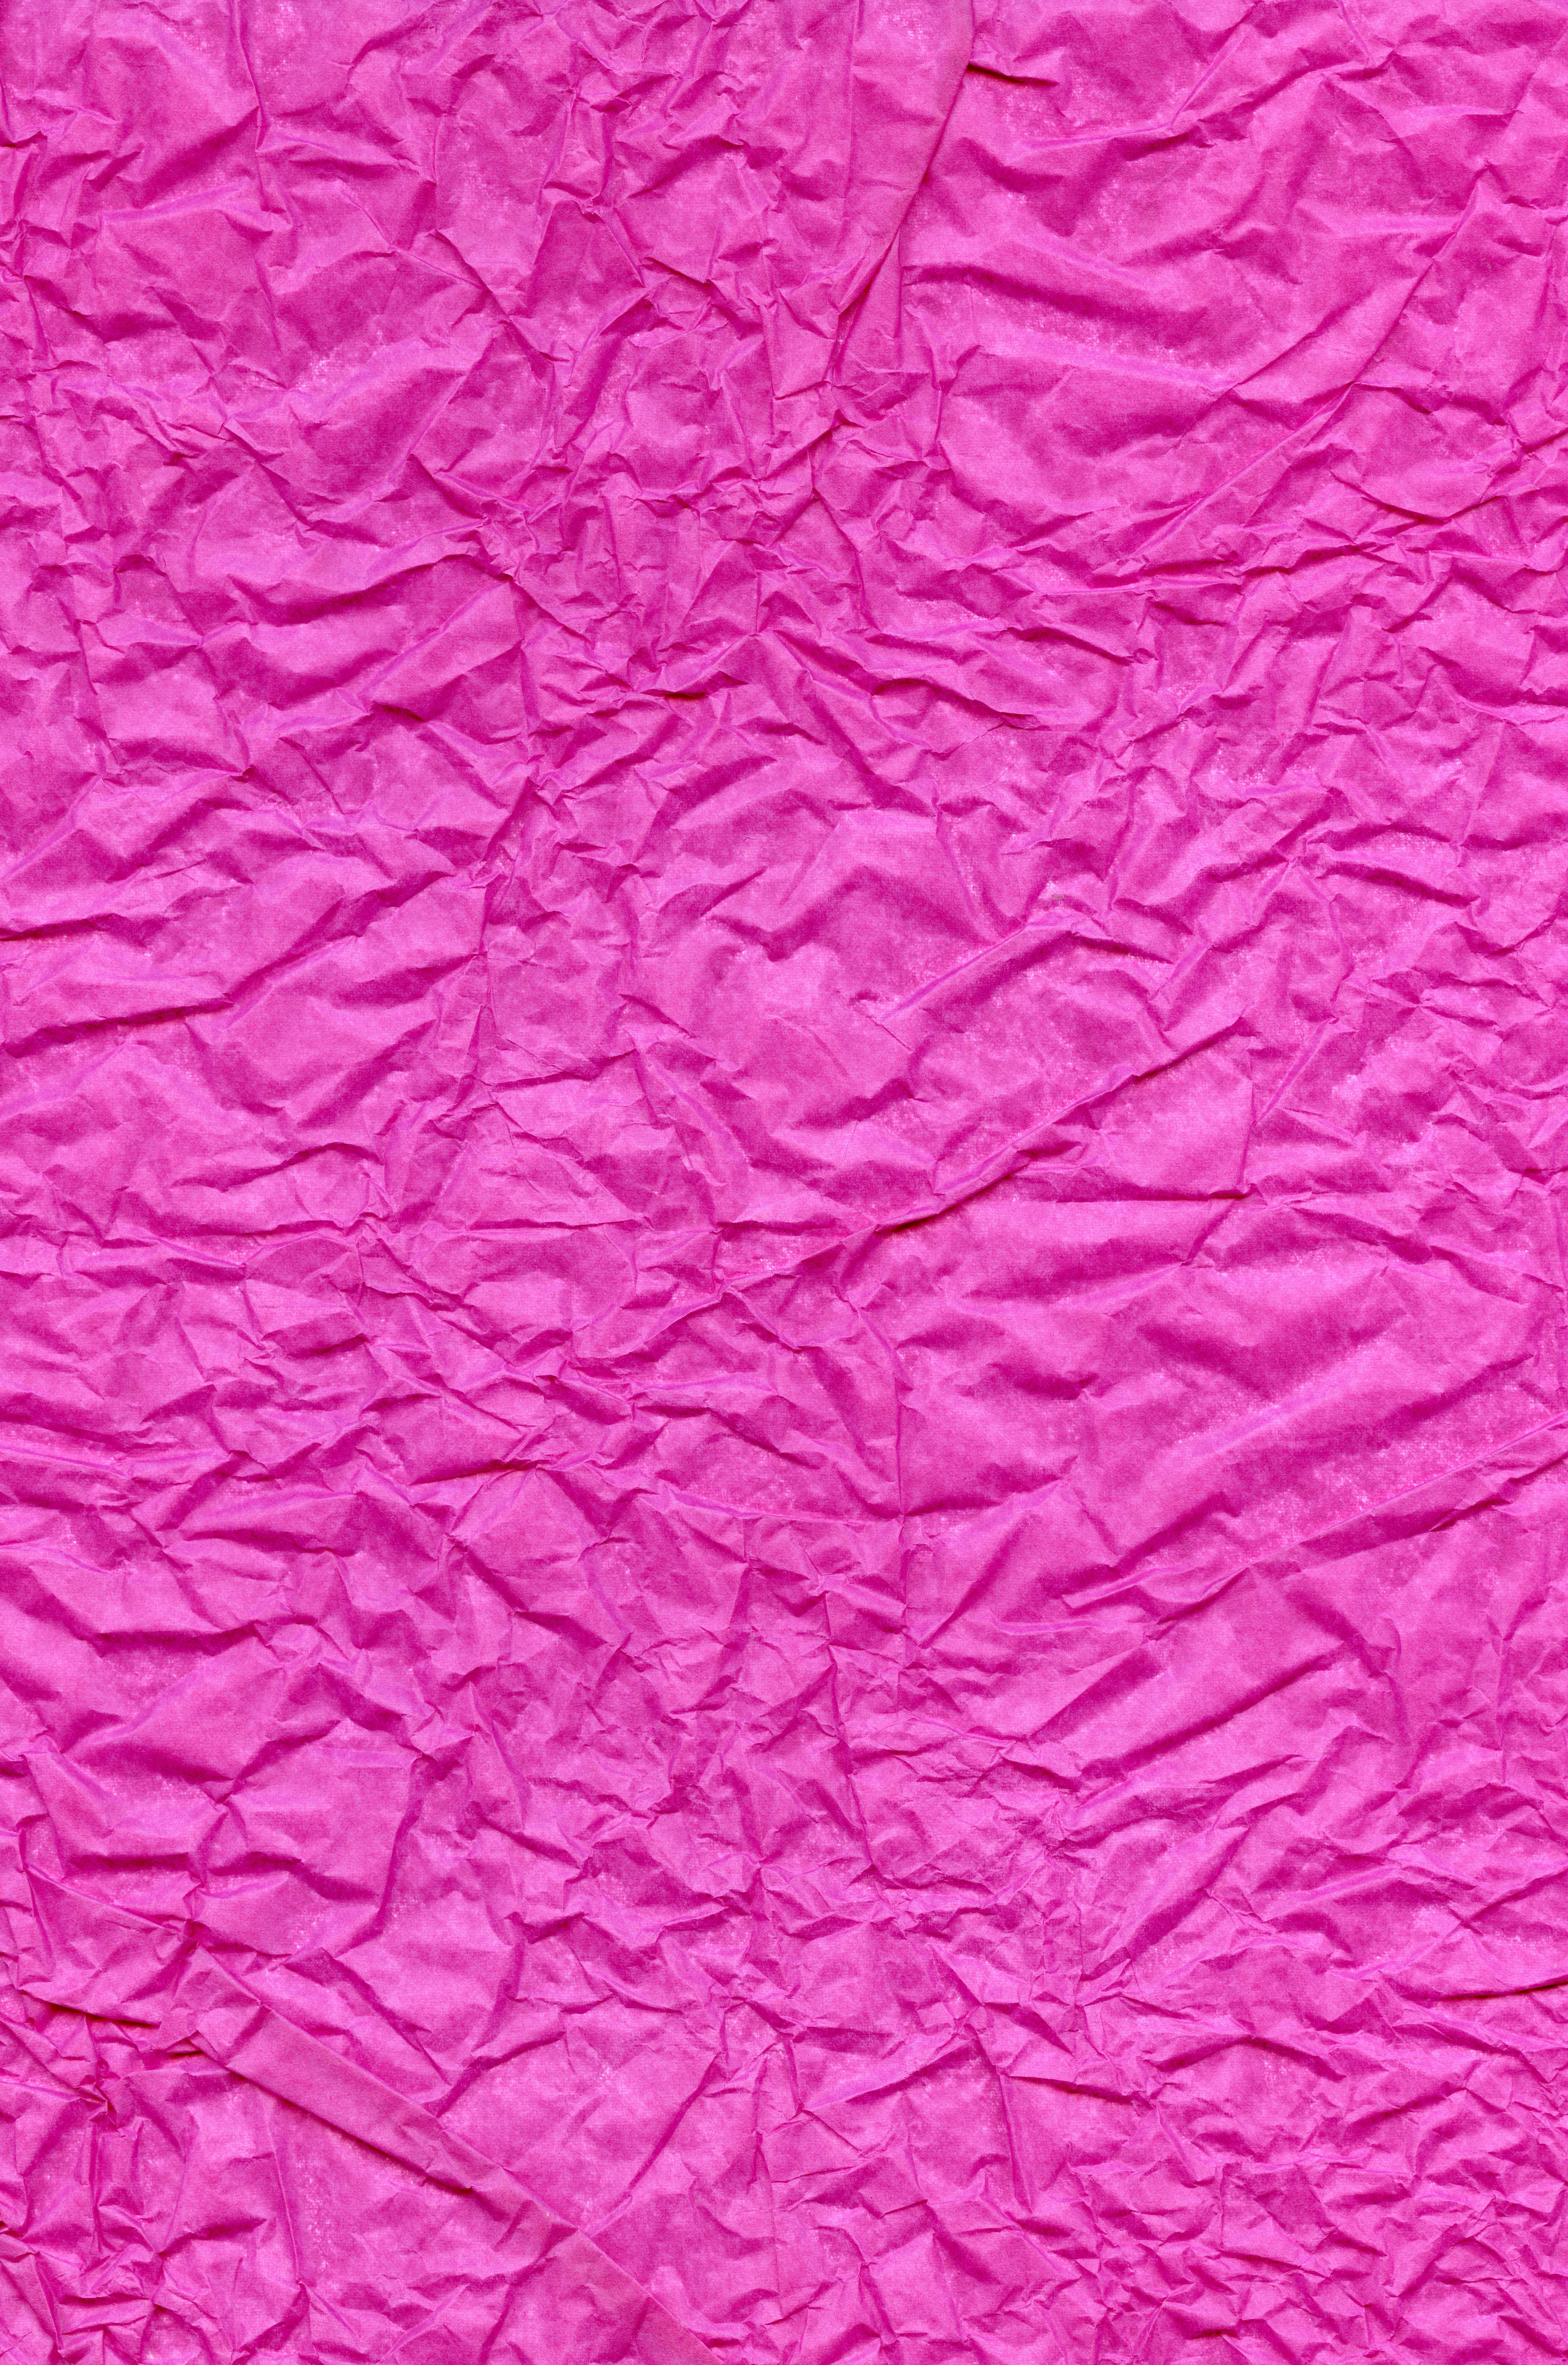 Crumpled pink magenta tissue paper for background or gift wrapping.  Abstract textured wrinkled crimson parchment backdrop.Surface of fuchsia  color wrapping paper with creases texture for background. Stock Photo